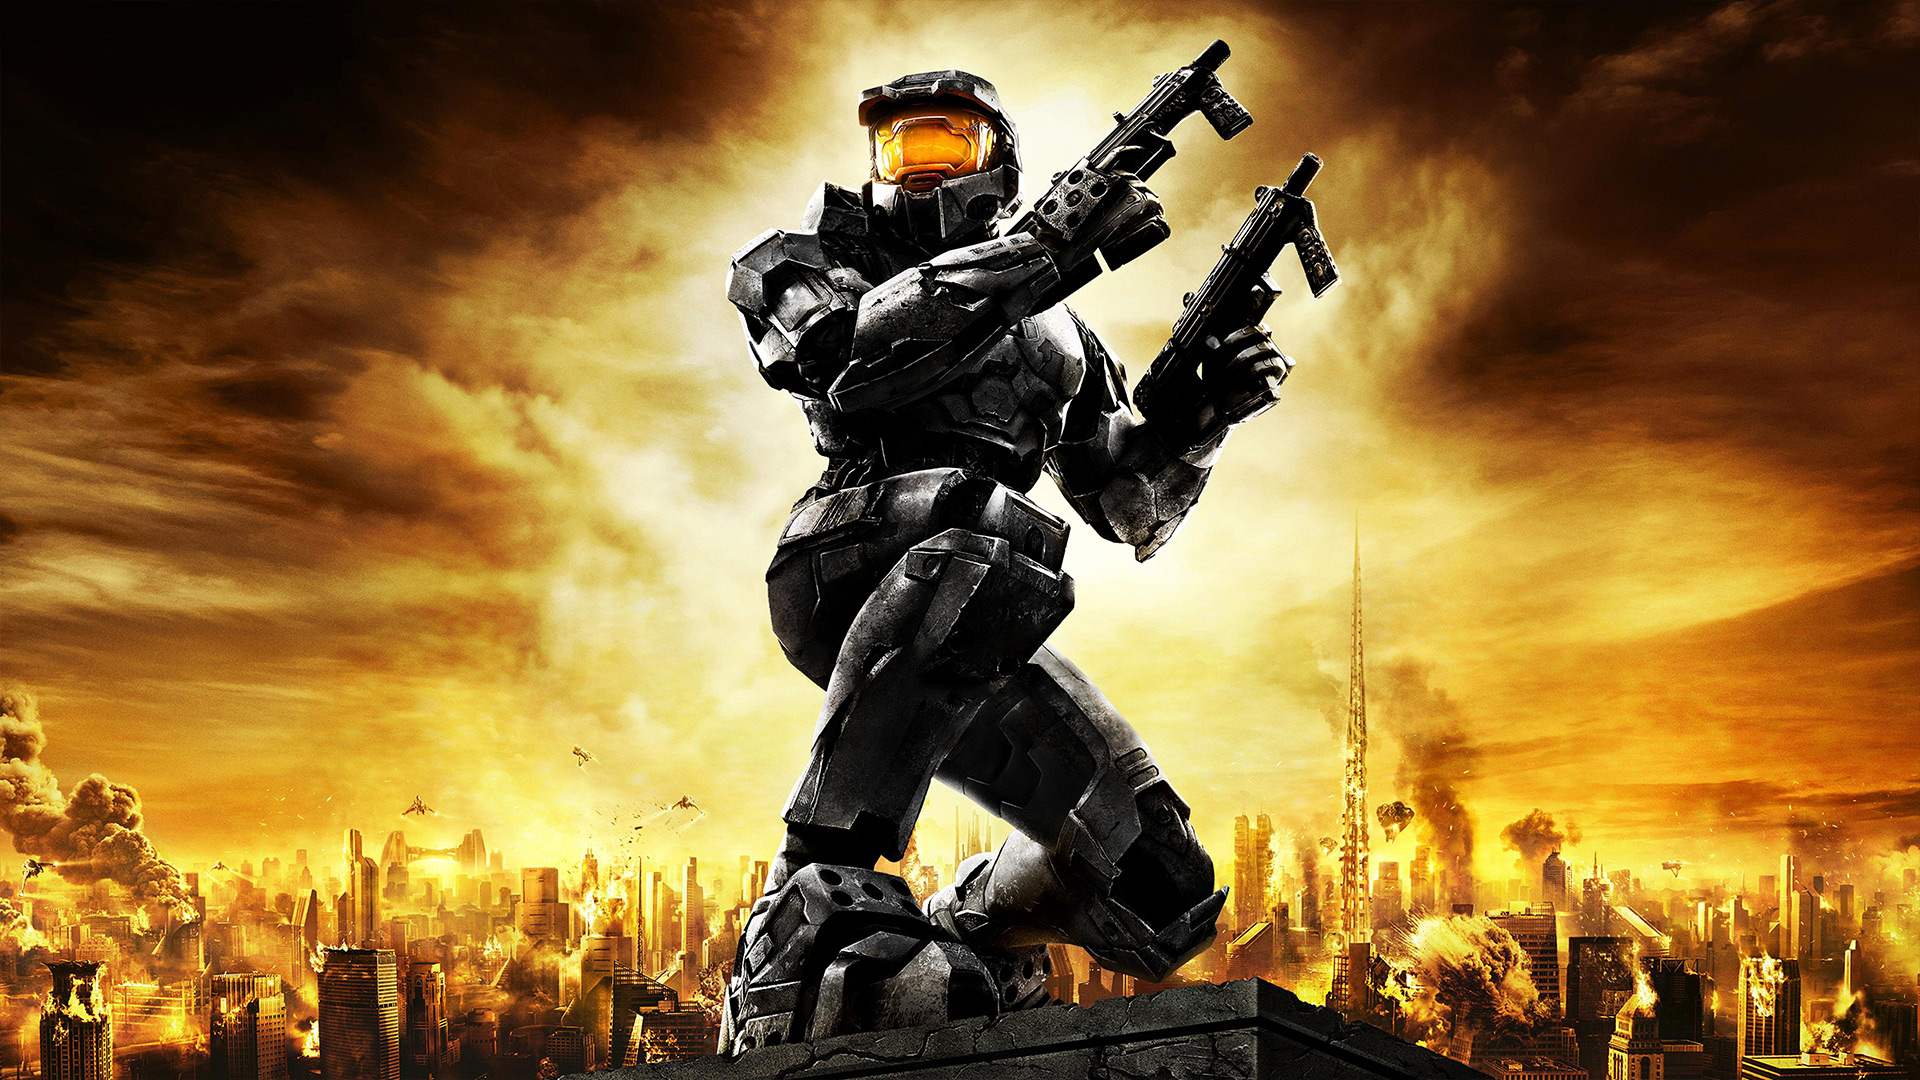 Halo games in order: Halo 2 art showing a dual-wielding Master Chief against the backdrop of a burning city.